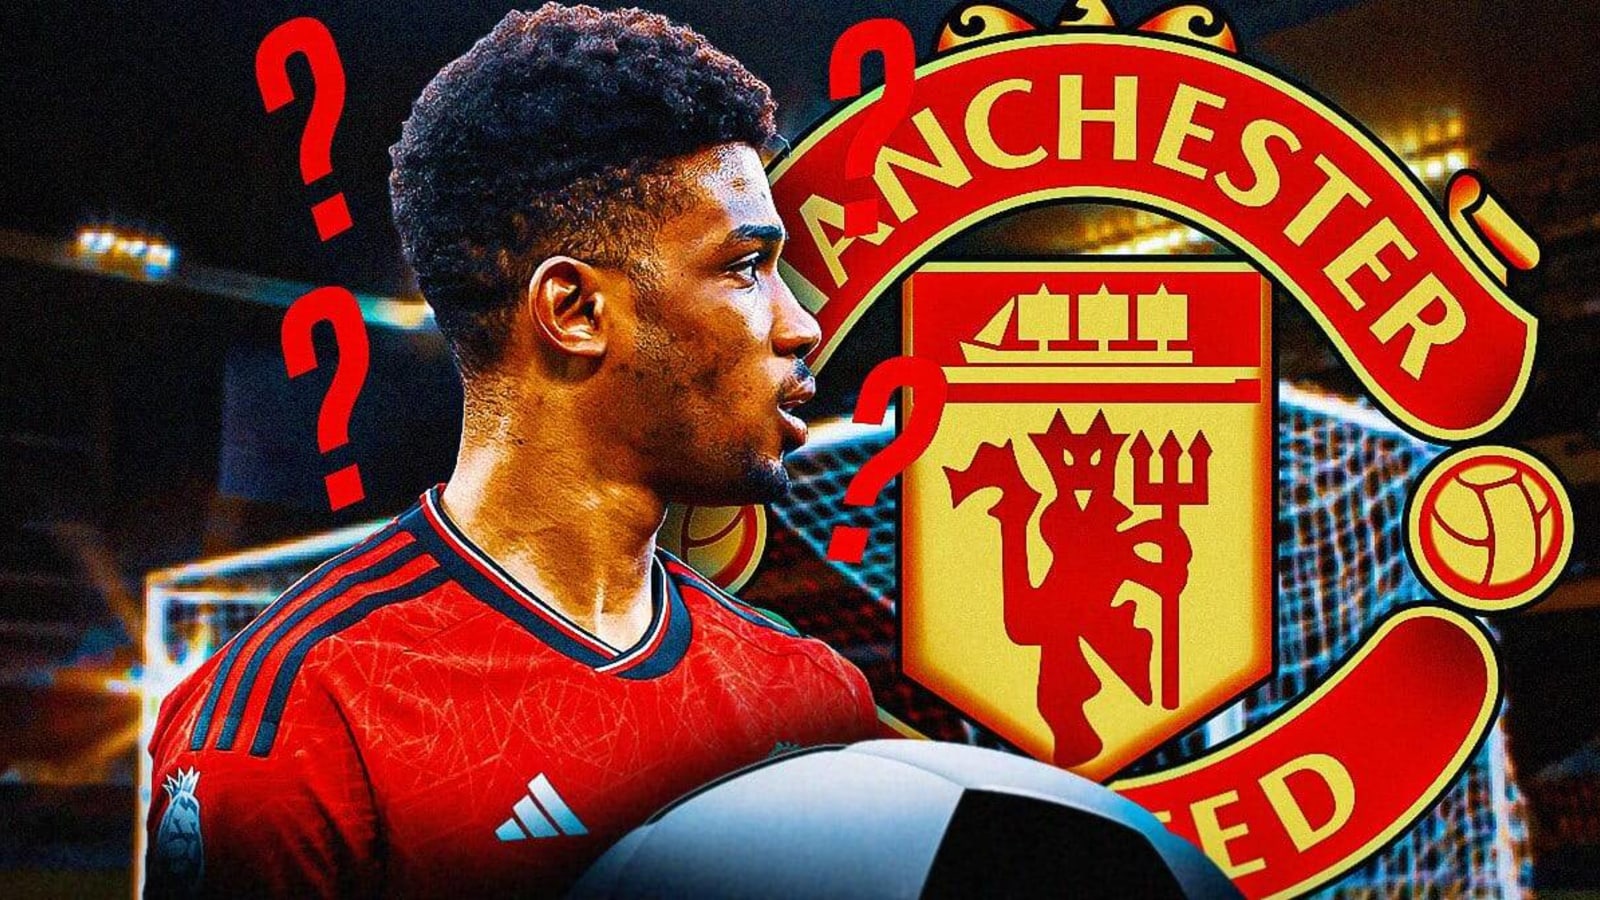 Amad Diallo talks on deleting everything related to Manchester United on social media